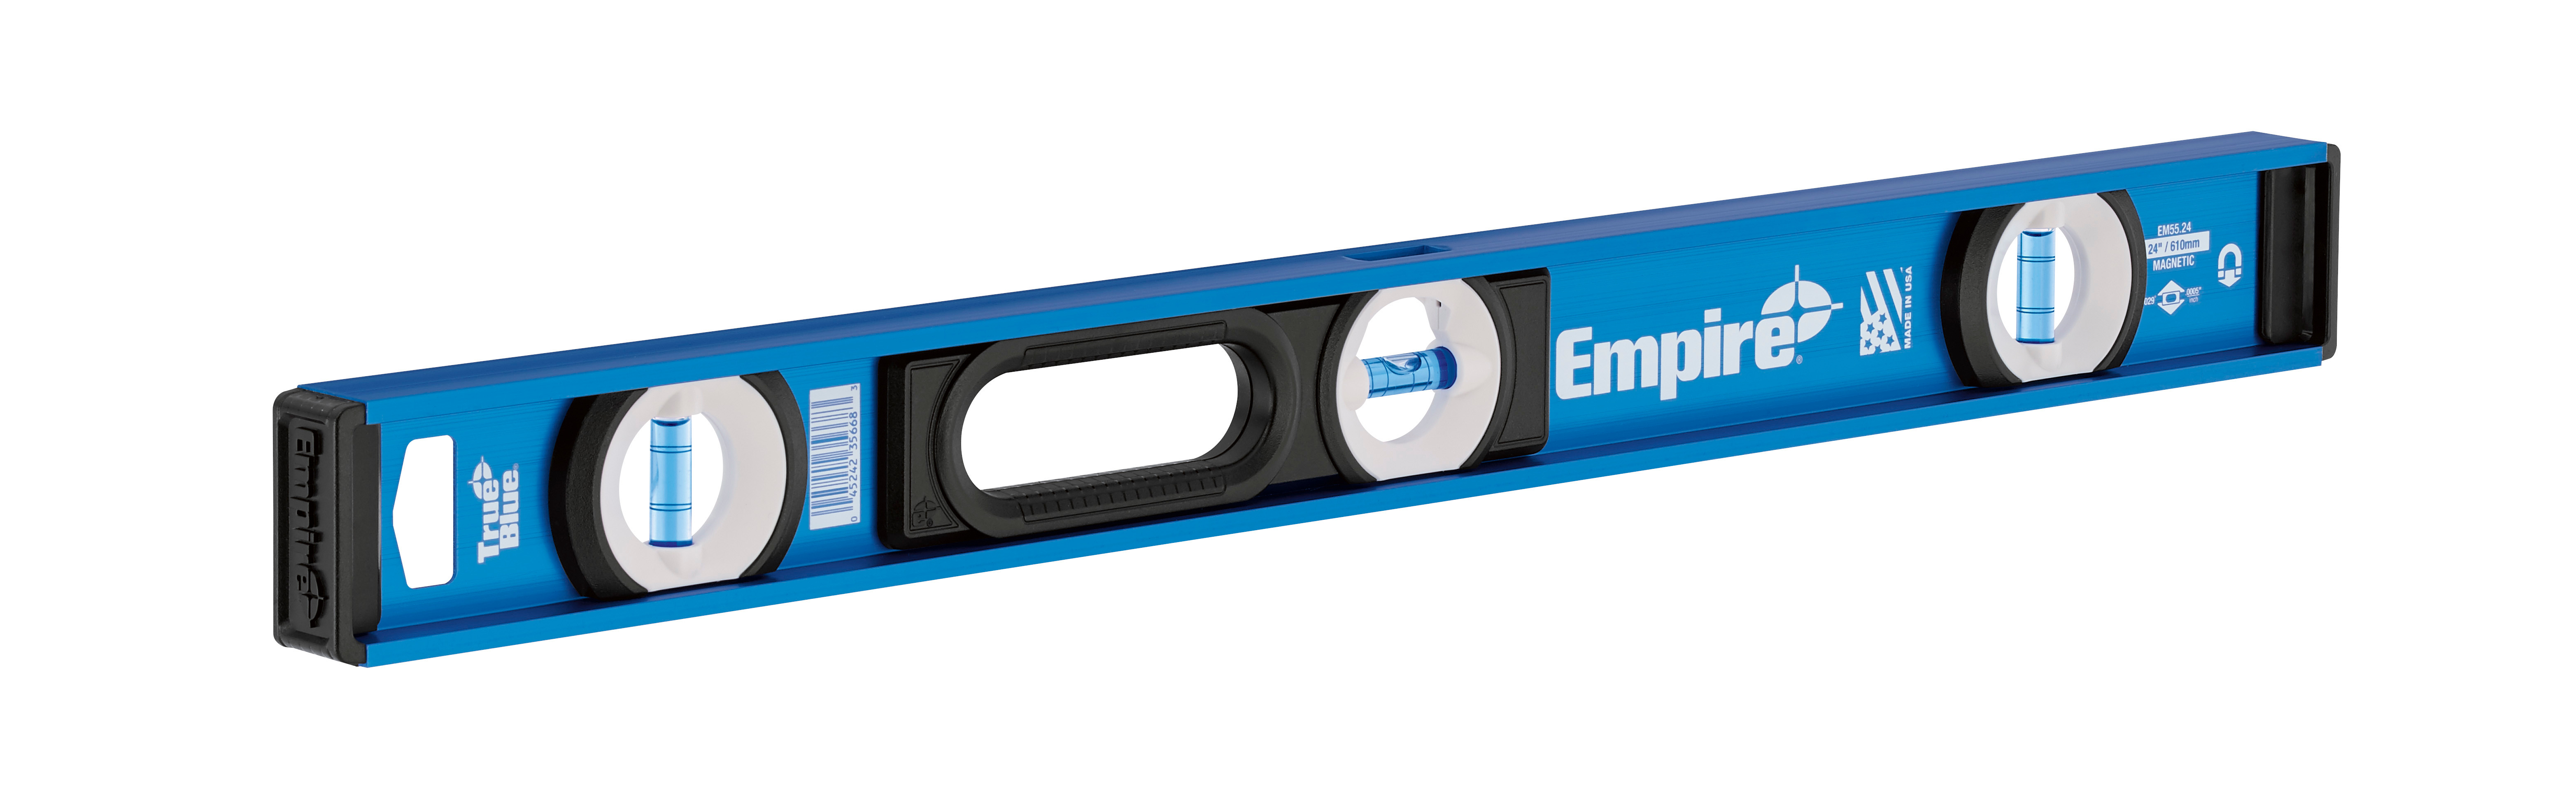 As the dominant market leader in levels, squares, and marking products Empire is committed to delivering innovative solutions designed for our end users and built for the modern jobsite. The Empire True Blue® I-Beam level offers superior performance in all key areas of user needs including accuracy, durability & readability. Empire's patented e-Band™ vials are accurate to within .0005 in. per in. in all plumb and level working positions. The all metal, anodized frame offers ergonomic grip zones and a top read window without sacrificing frame strength and durability. High contrast vial surrounds provide maximum visibility in all light conditions and feature high impact acrylic vials for long-life protection and accuracy. Empire's True Blue® I-Beam levels are designed for the jobsite and are backed with a Limited Lifetime Warranty.  Features e-Band™ vials are accurate to within 0.0005 in. per inch in all working positions. High impact acrylic vials deliver long-life accuracy and read-out. All metal anodized I-Beam frame will not rust or corrode. High contrast vial surrounds make viewing easier in all light conditions. Top read window provides clear overhead viewing. Wide, durable handles for ease of use and enhanced portability. Compact end caps are impact resistant and offer protection for long-life accuracy. Full-length magnetic edge for superior holding strength. Made in USA. Limited Lifetime Warranty 56683